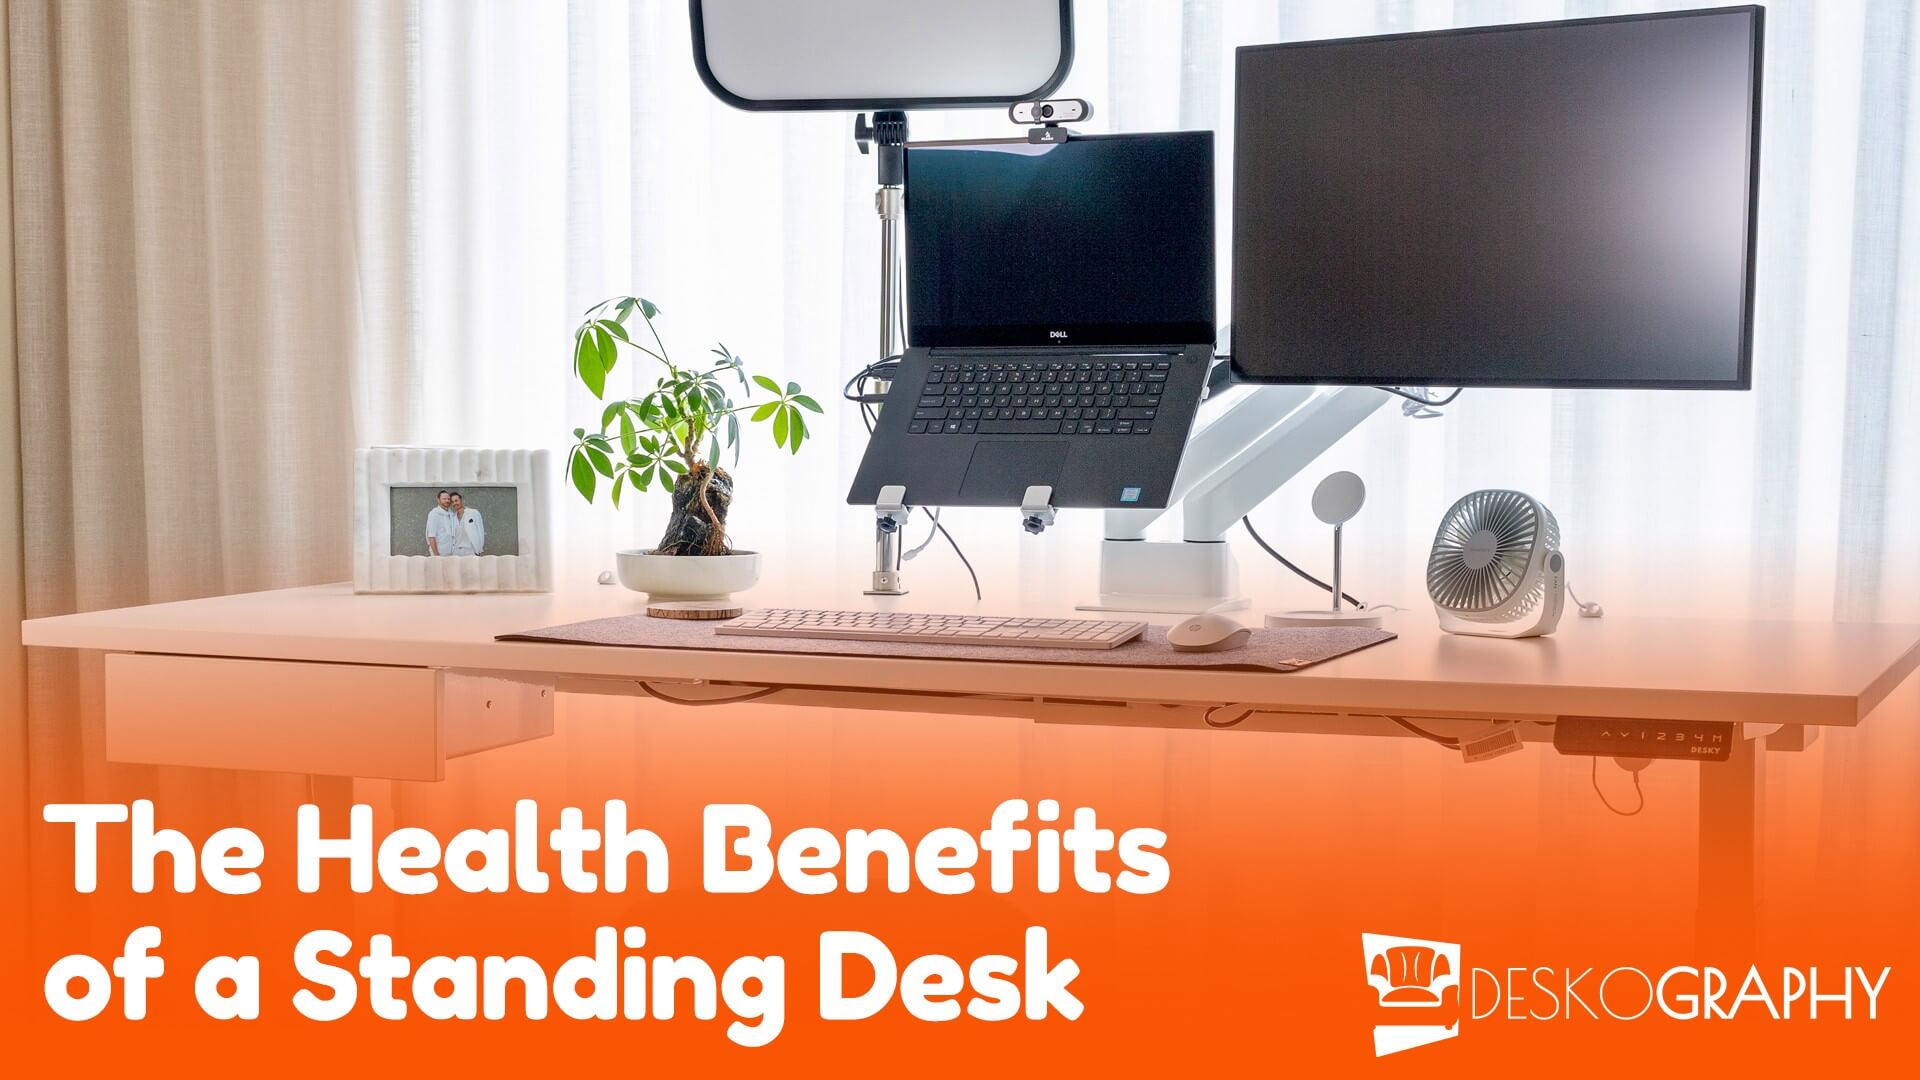 The Health Benefits of a Standing Desk